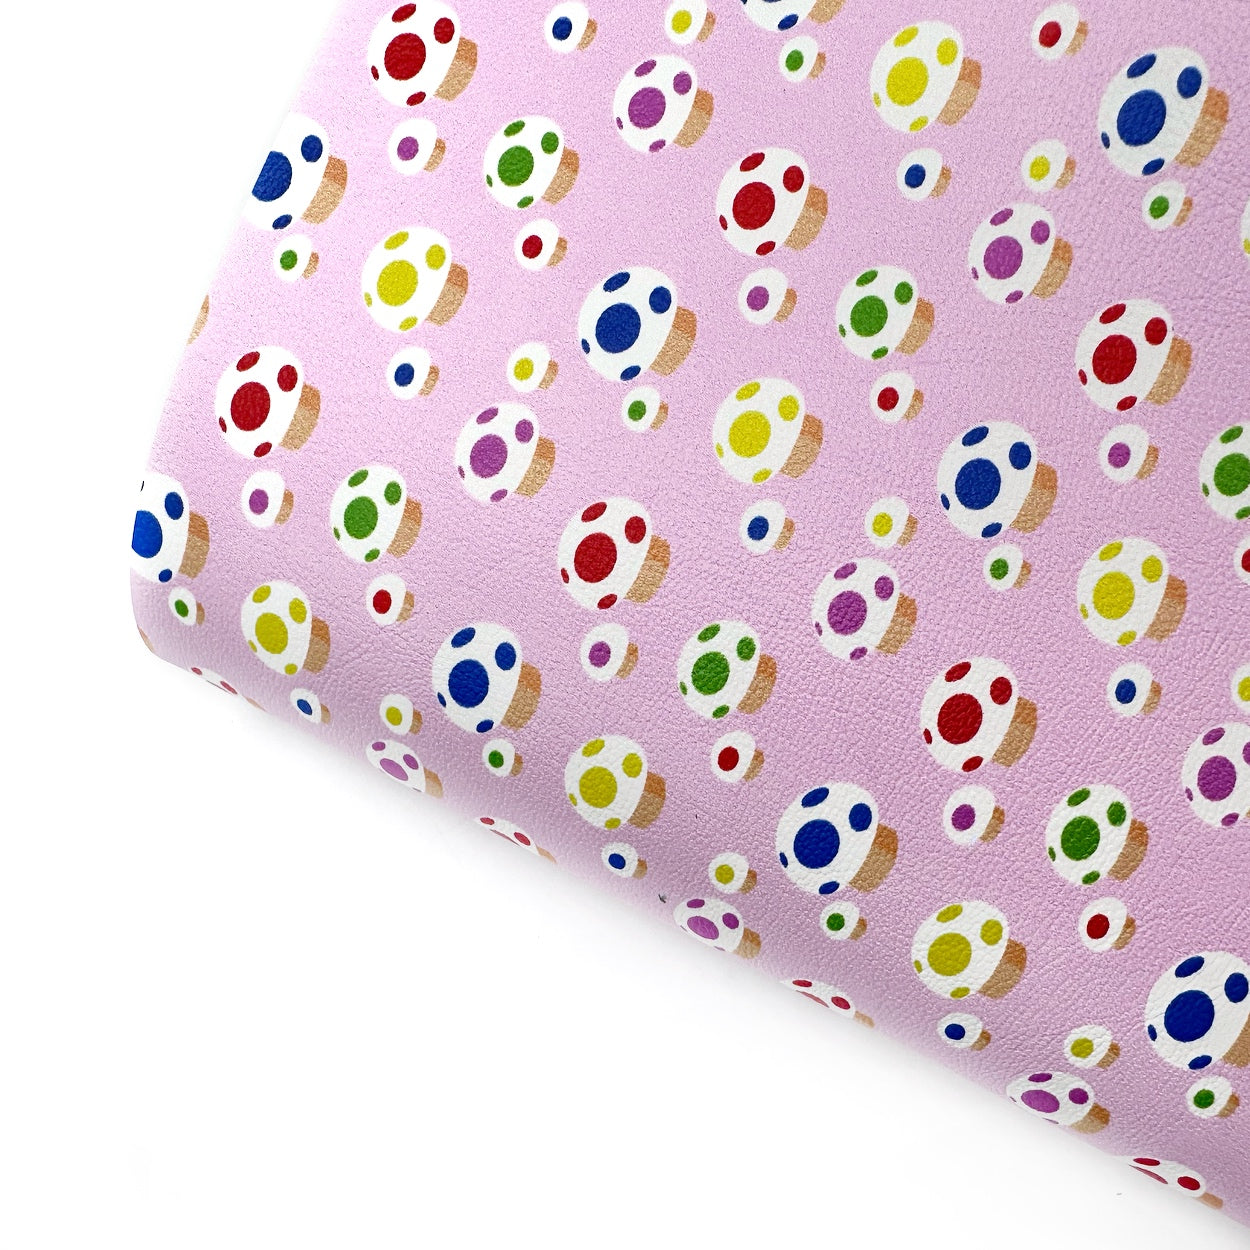 Baby Pink Rainbow Mushrooms Premium Faux Leather Fabric Sheets